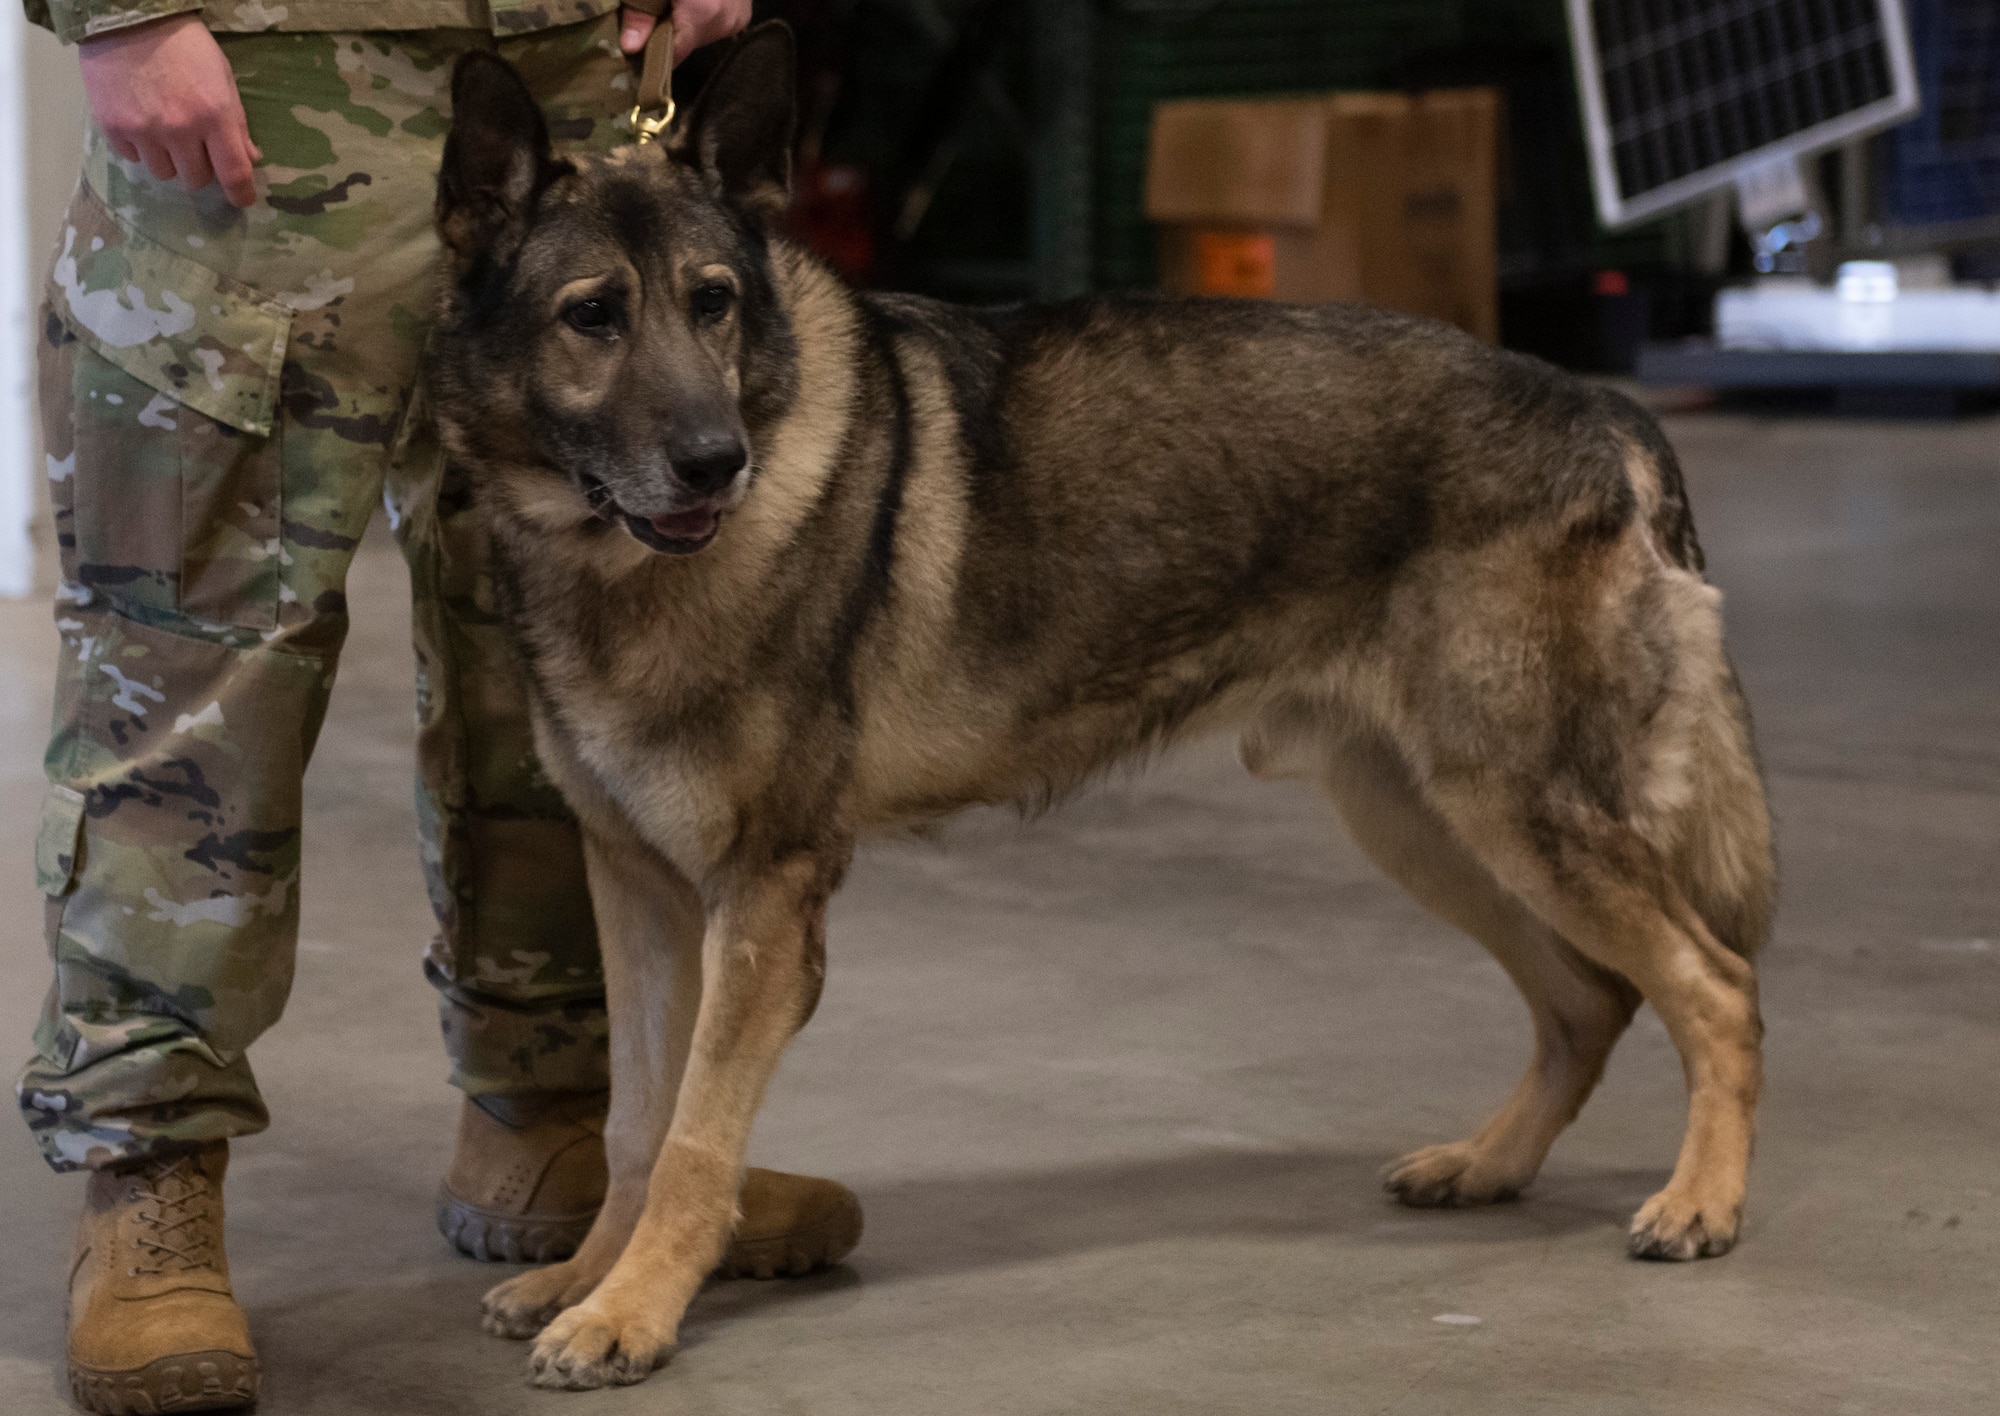 Military working dog, Morgen stands. Airman holds the leash.